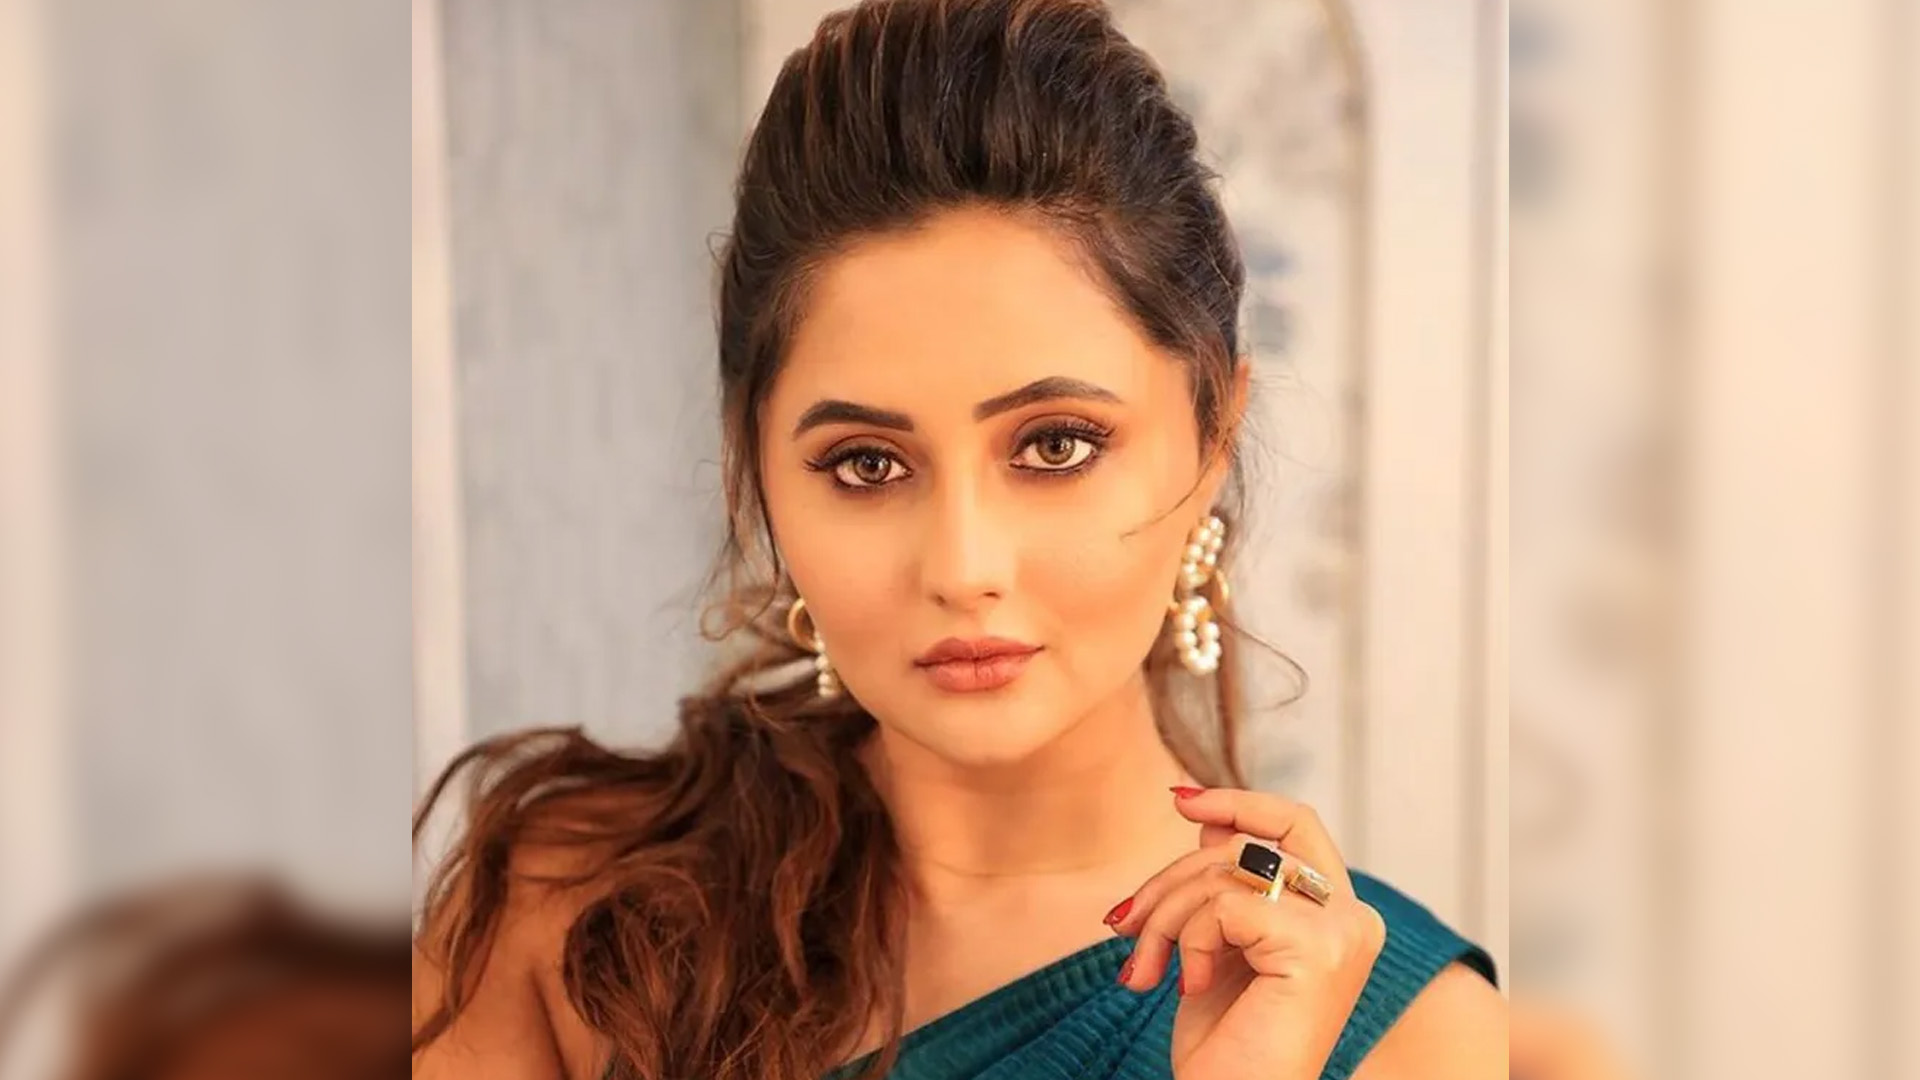 Rashami Desai stands tall after everyone corners her in the house.